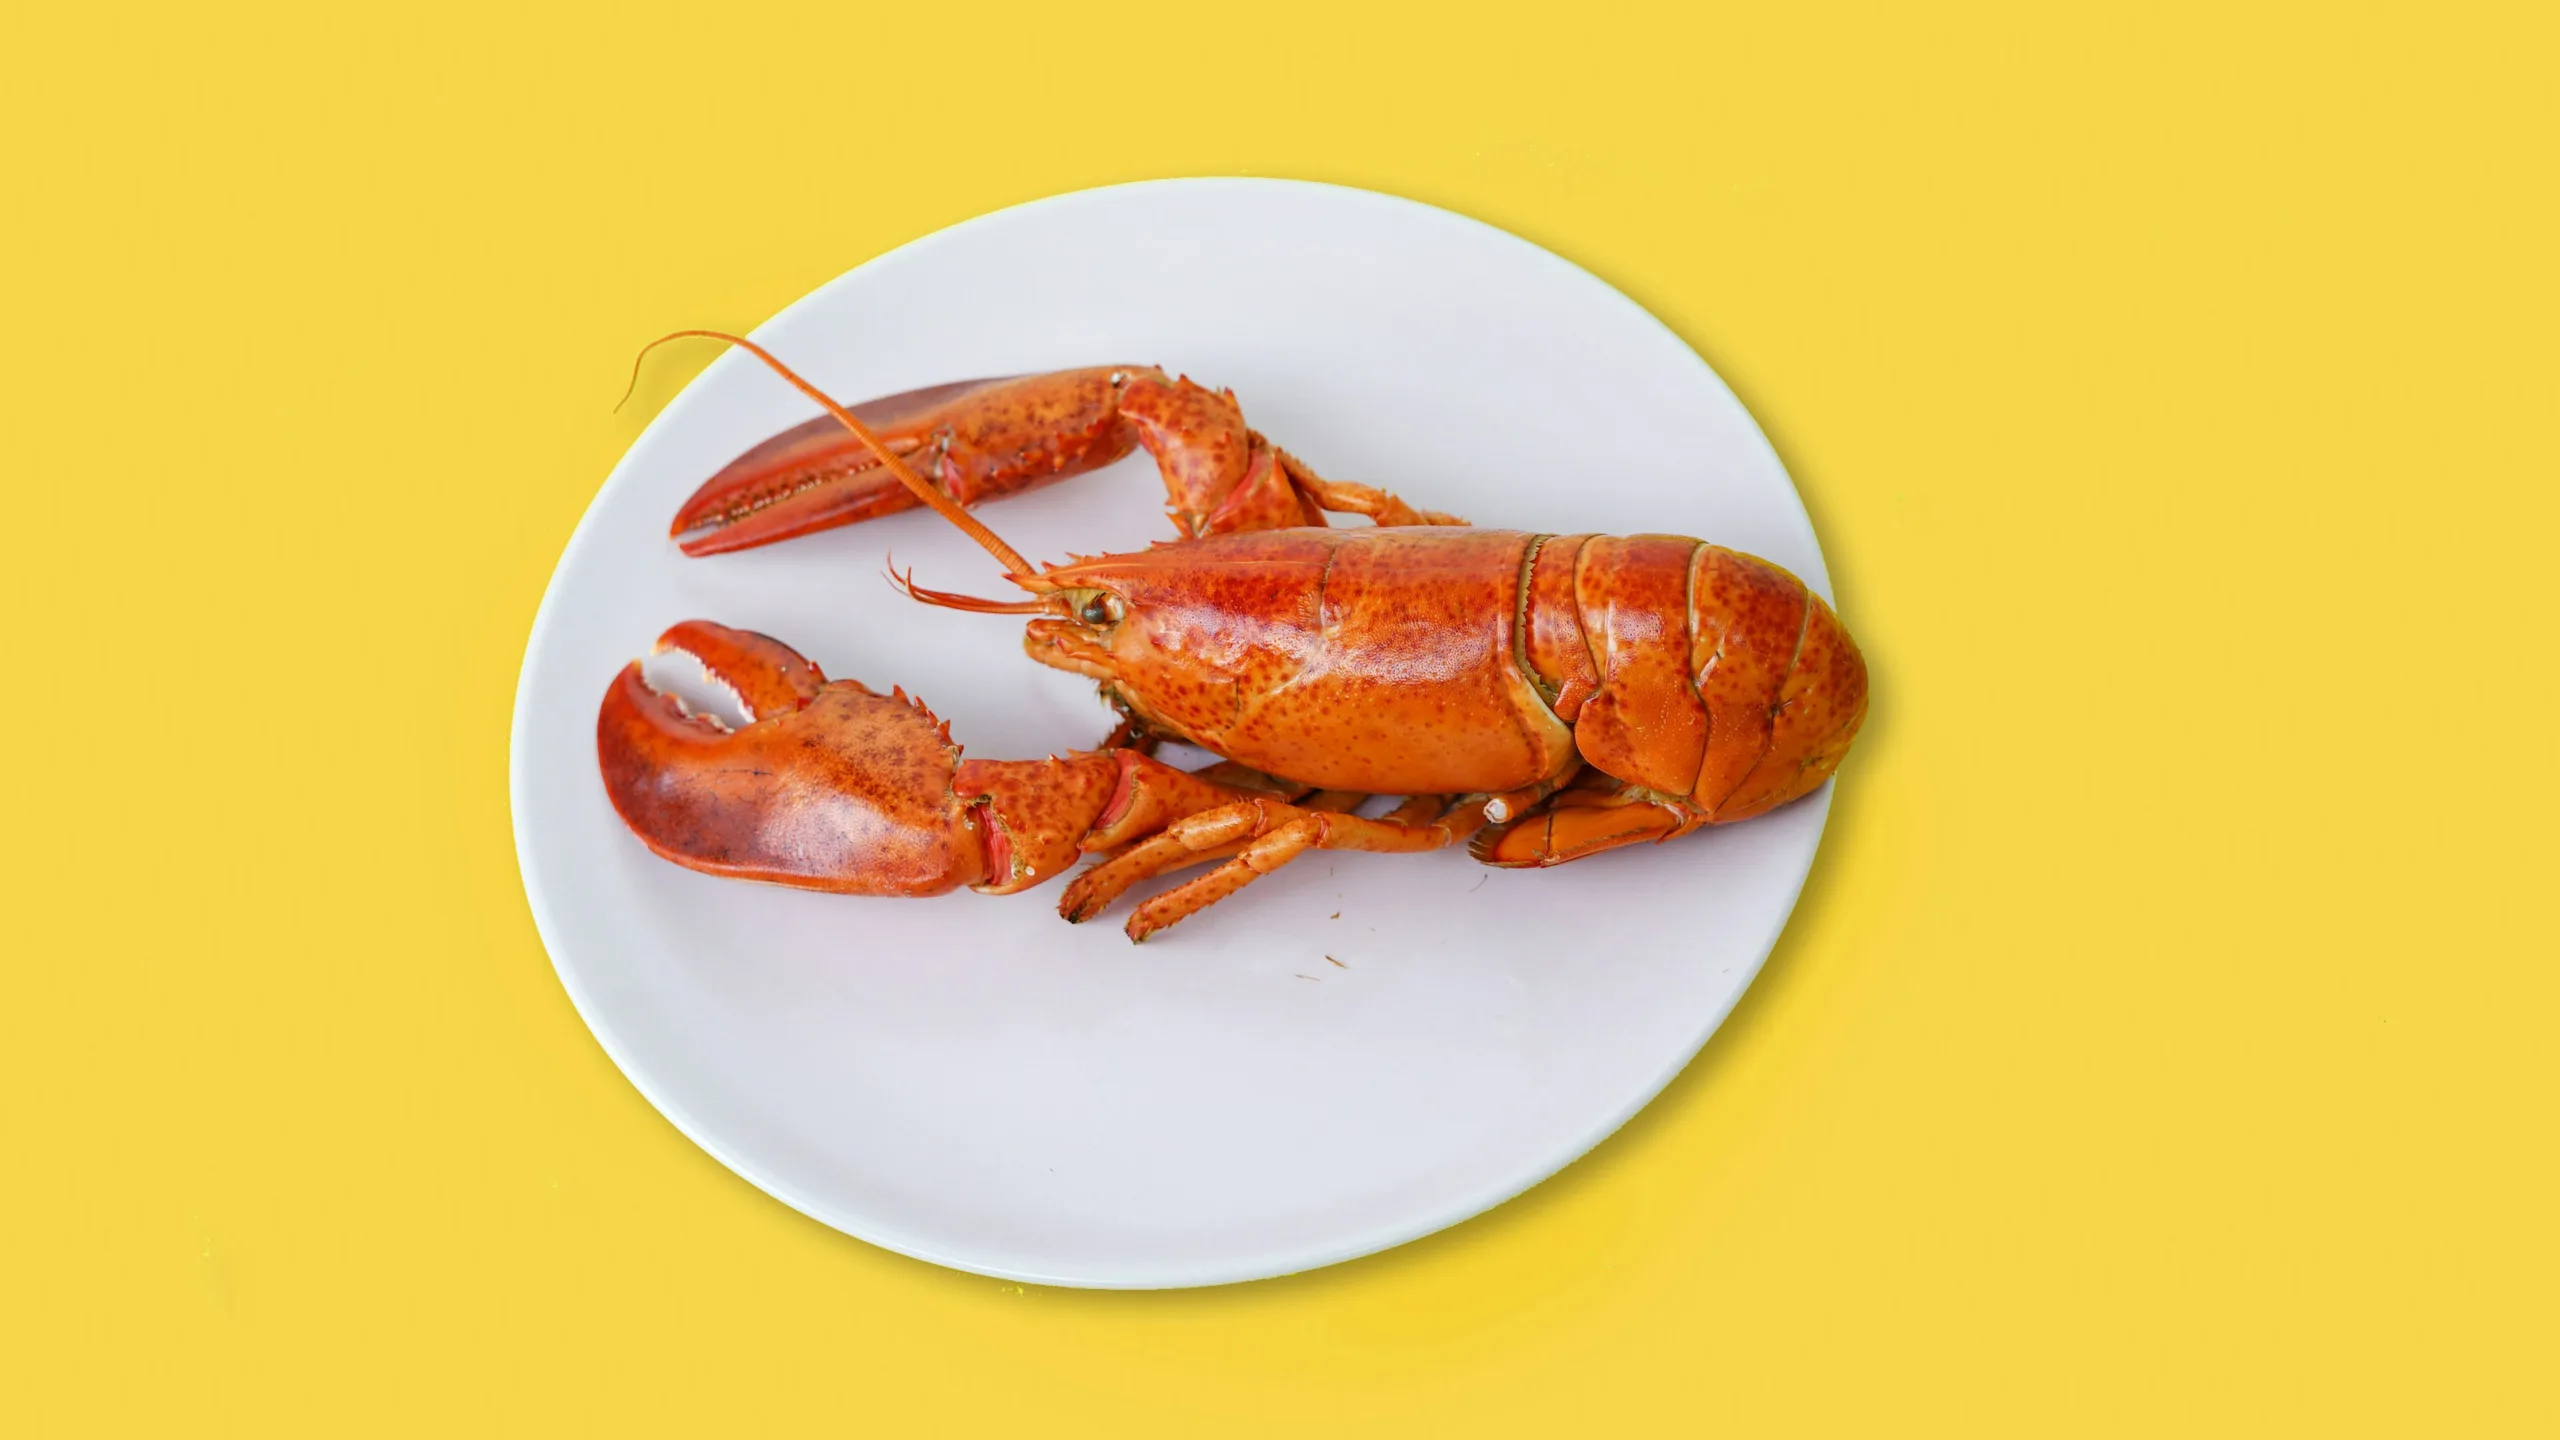 Photograph of a lobster on a plate with a yellow background